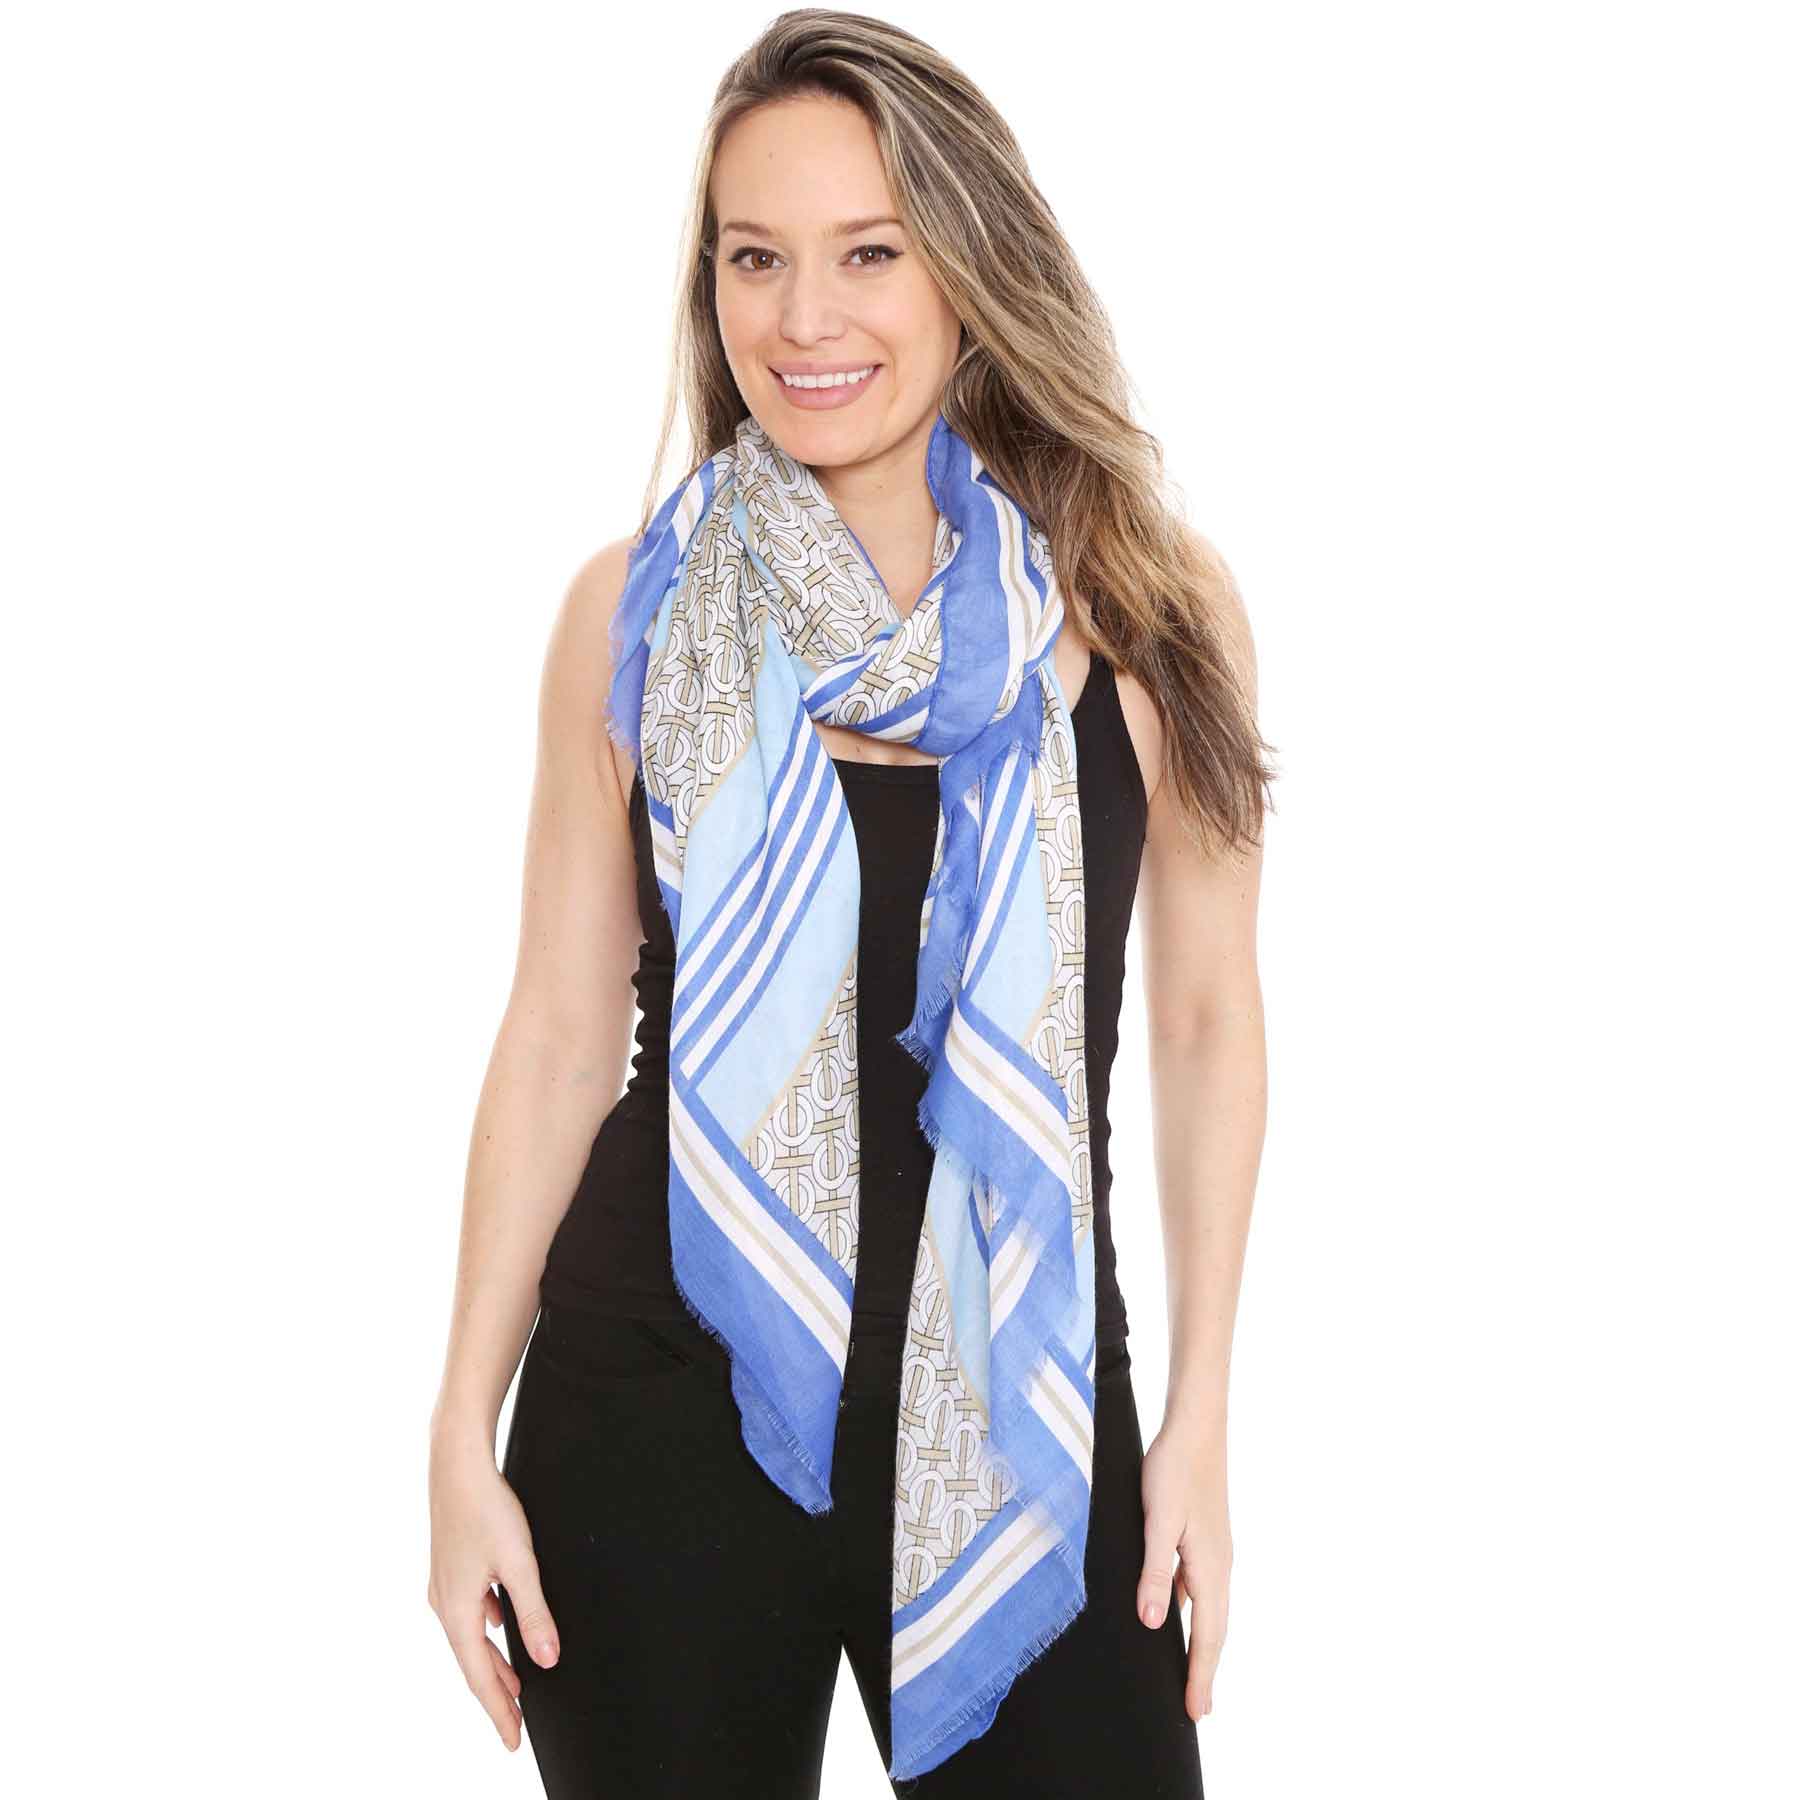 3861 - Assorted Cotton Feel Summer Scarves 1363 - Blue<br>
Circles and Stripes Scarf - 35